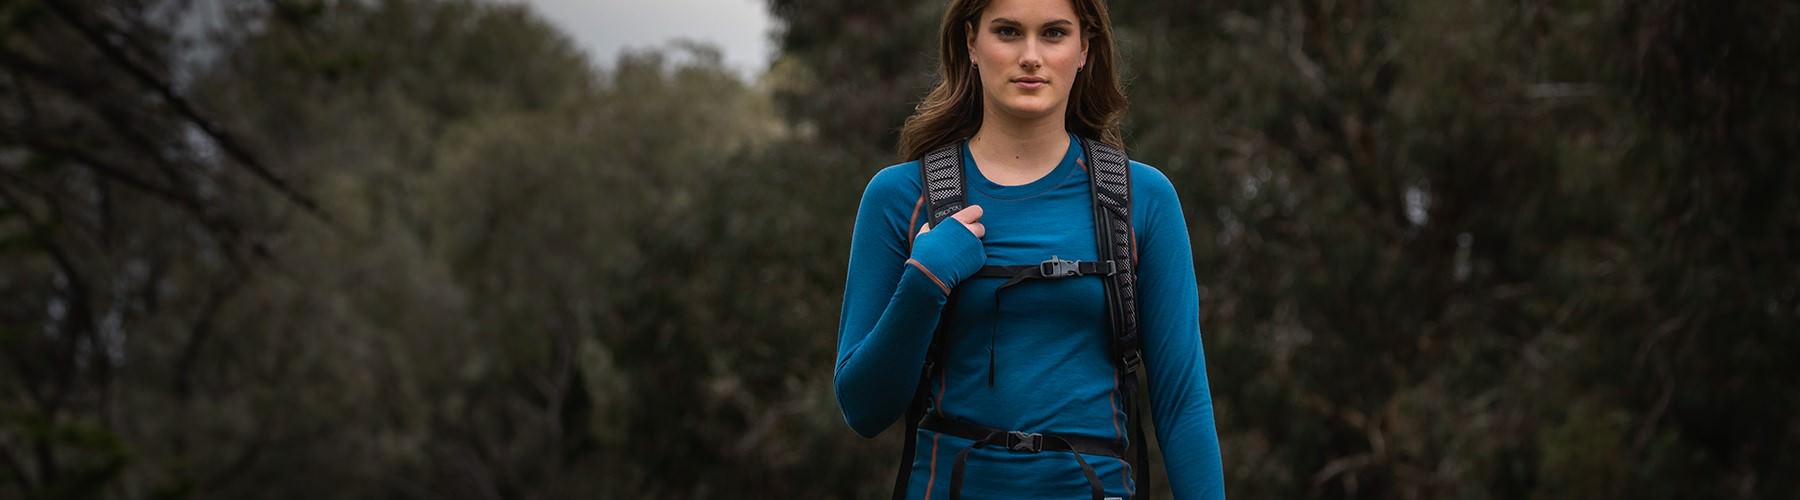 Woman hiking in the outdoors wearing a blue Ultra Crew Neck Top